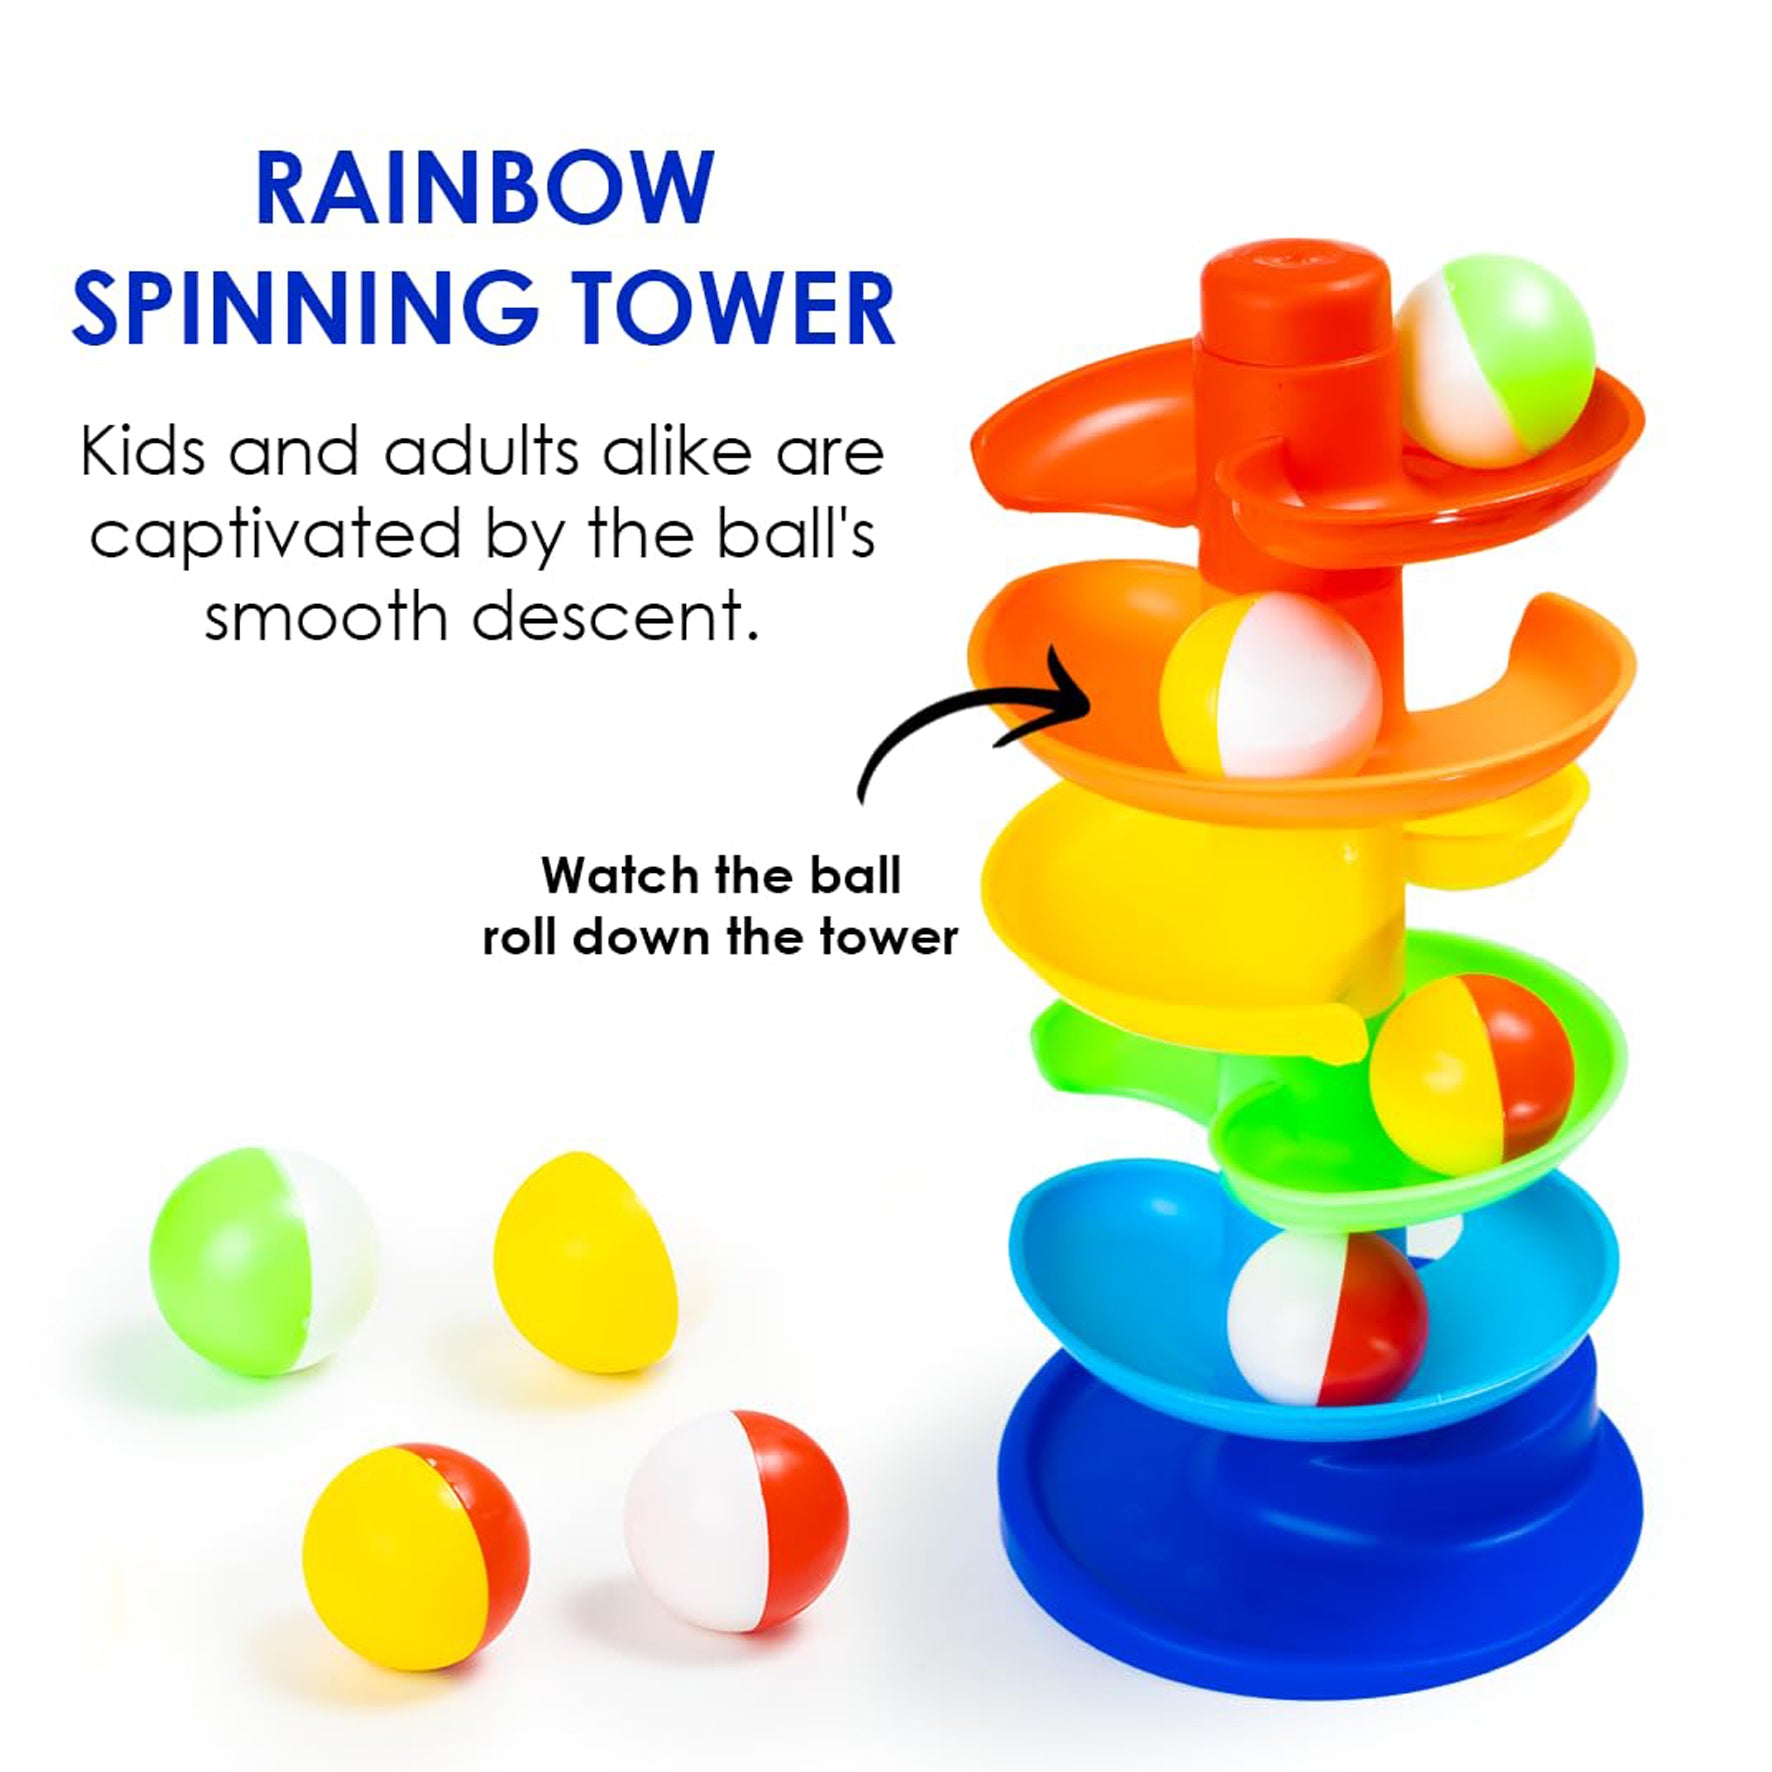 RATNA'S 3 in 1 Kinder Gift Set Containing Stack-N-Spin, Rainbow Spinning Tower & Shape Sorter Cube Montessori Toys Preschool Learning for Infants & Toddlers